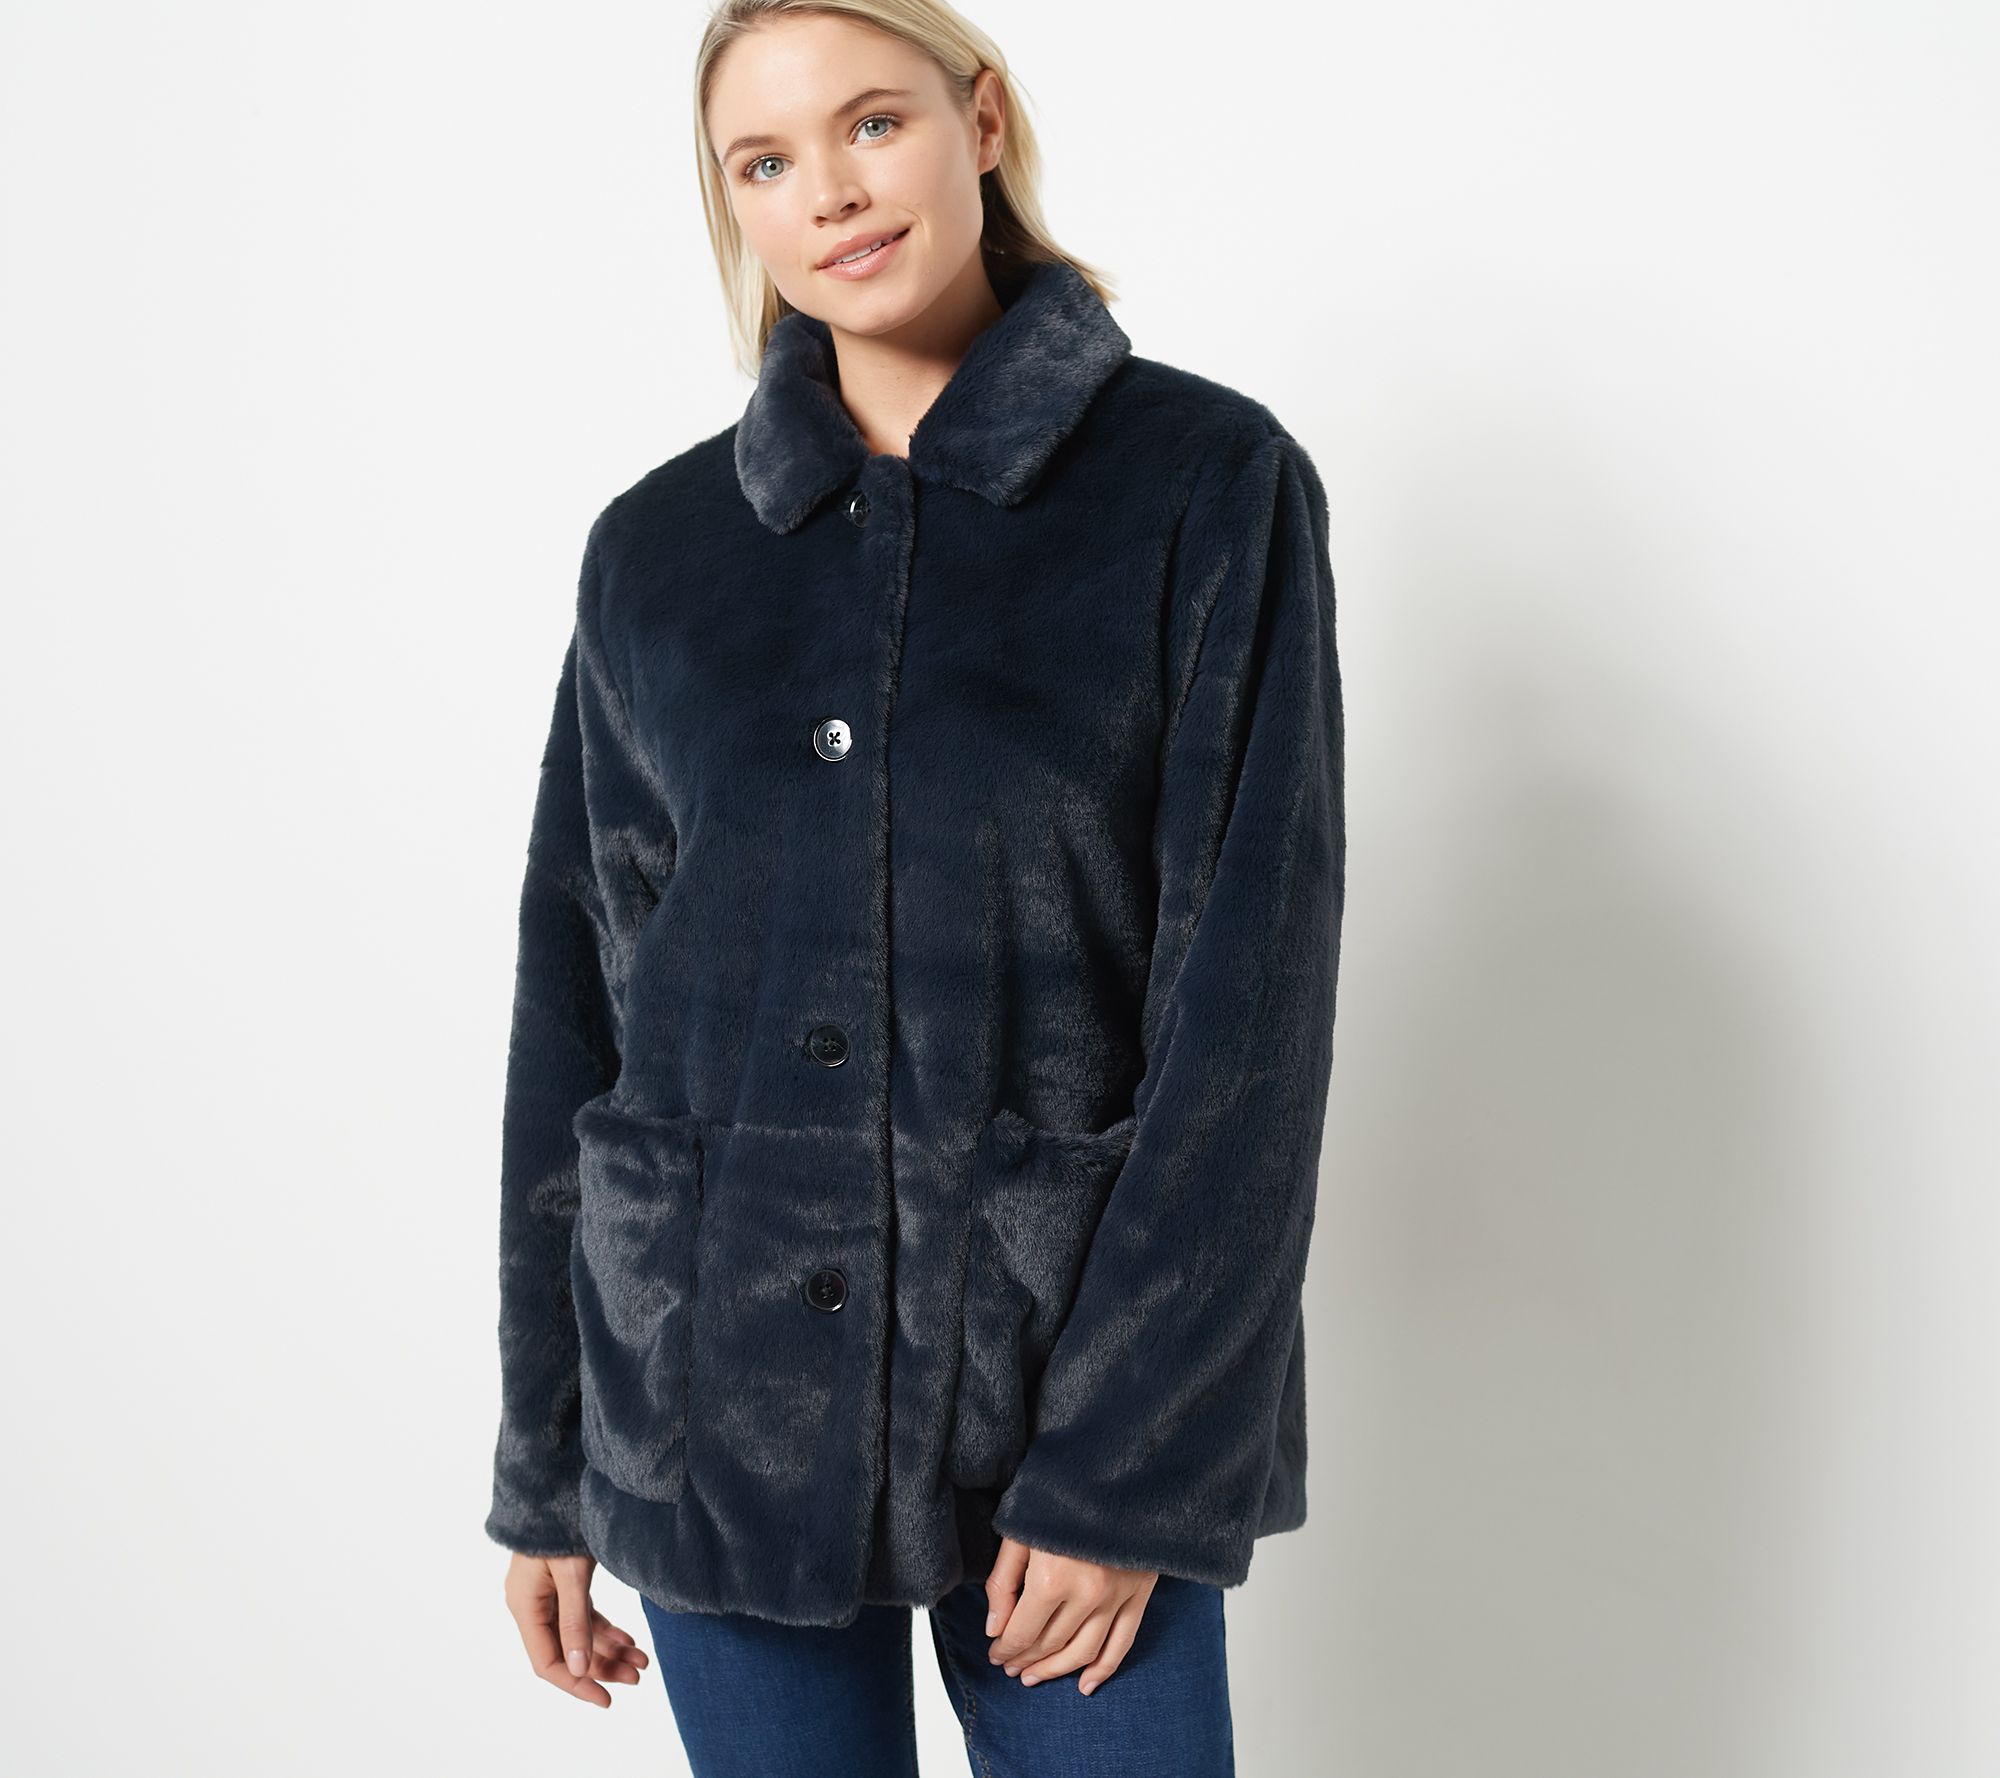 Cuddl Duds Everyday Luxe Faux Fur Shirt Jacket 